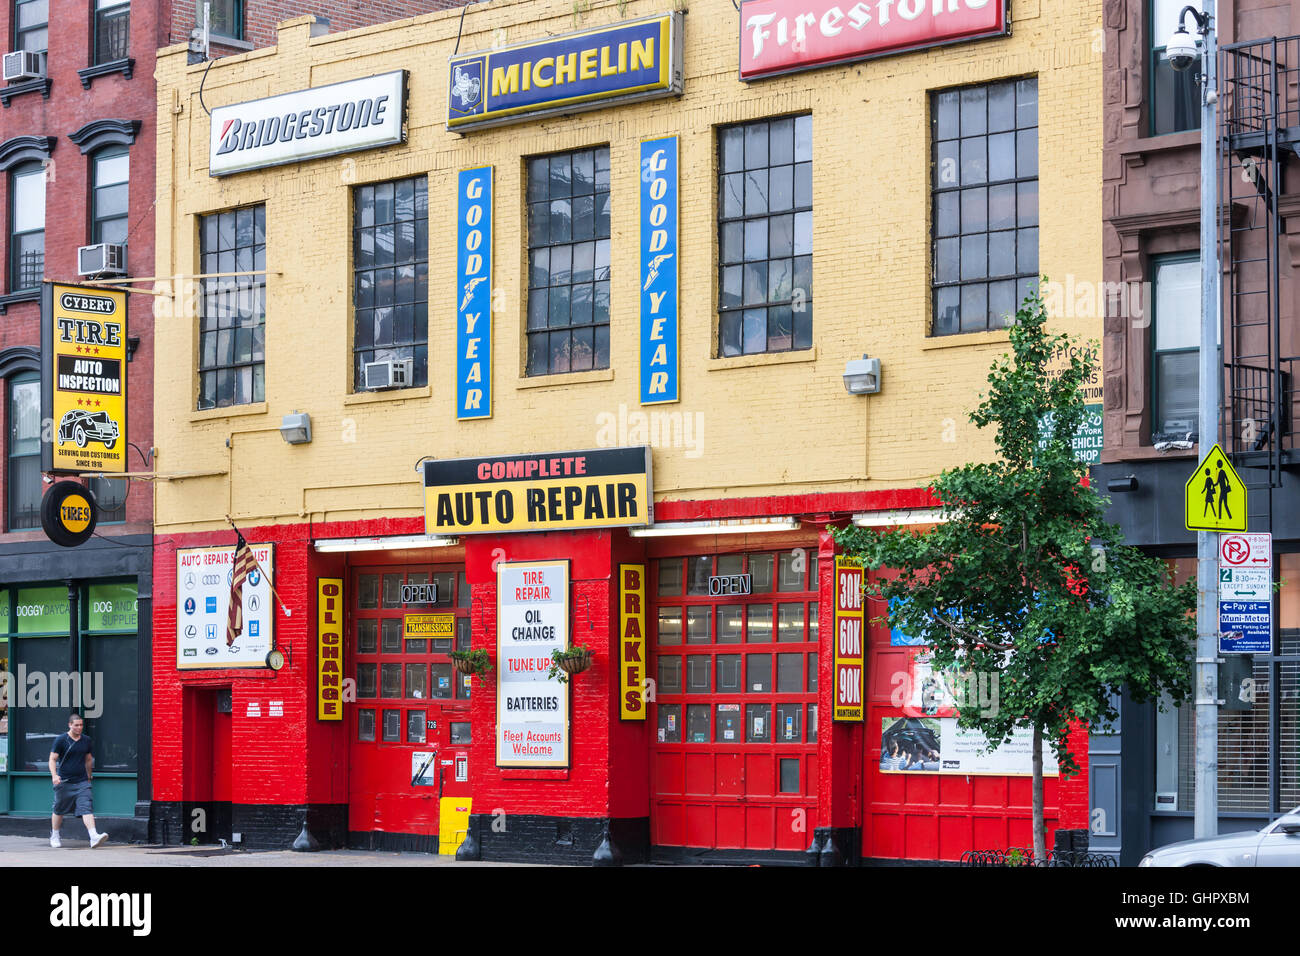 The colorful facade of Cybert Tire, an auto repair shop and tire center in New York City. Stock Photo